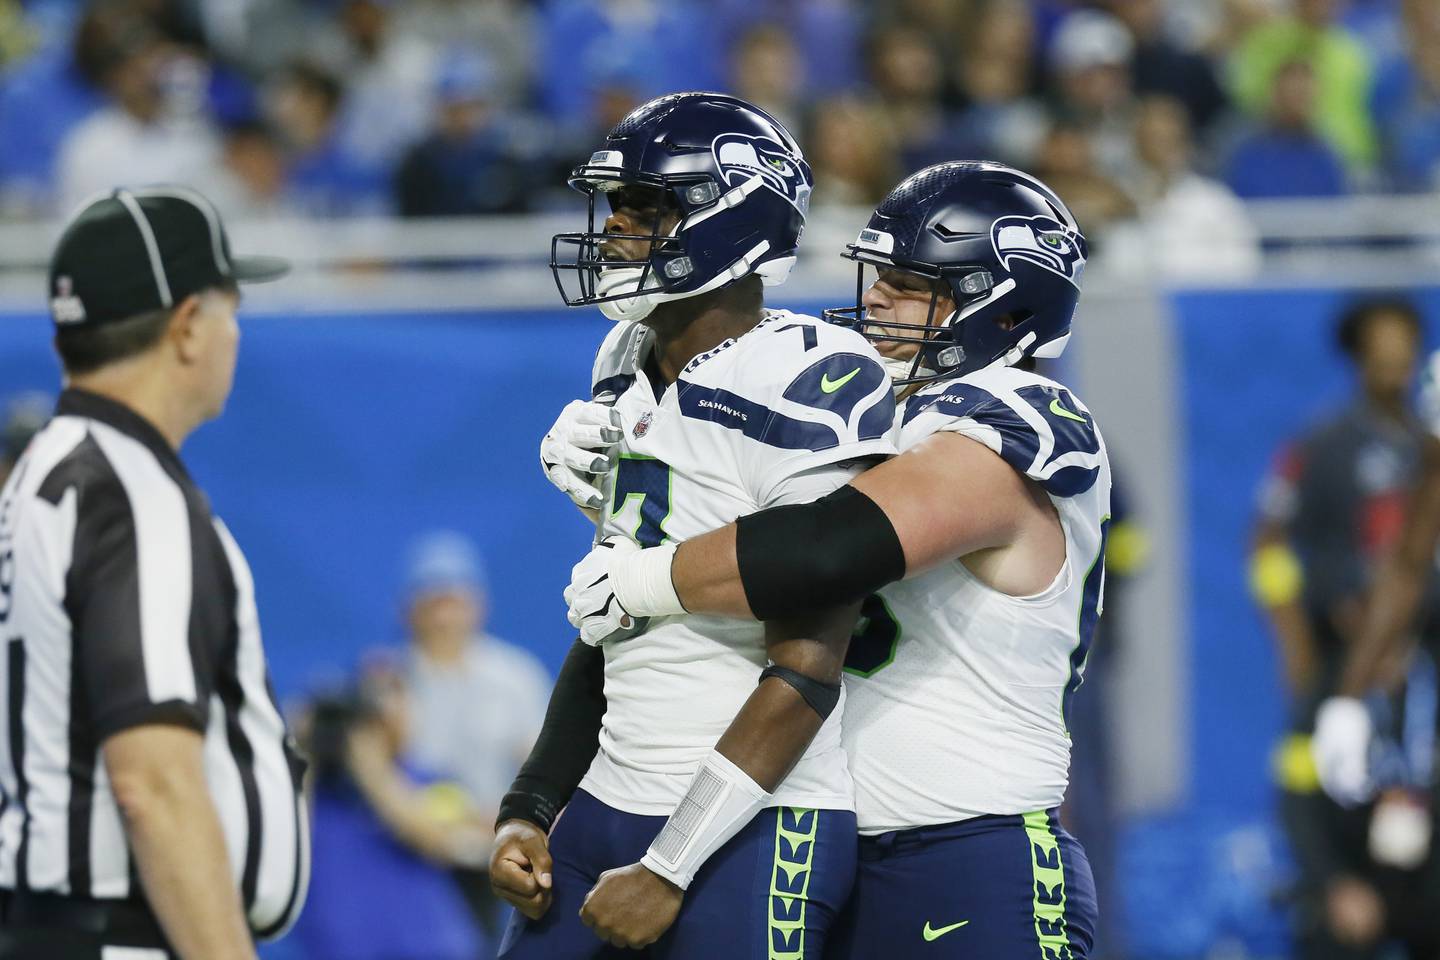 Seahawks quarterback Geno Smith is hugged by guard Austin Blythe, right, after Smith rushed for an 8-yard touchdown during the first half against the Lions on Sunday, Oct. 2, 2022, in Detroit.